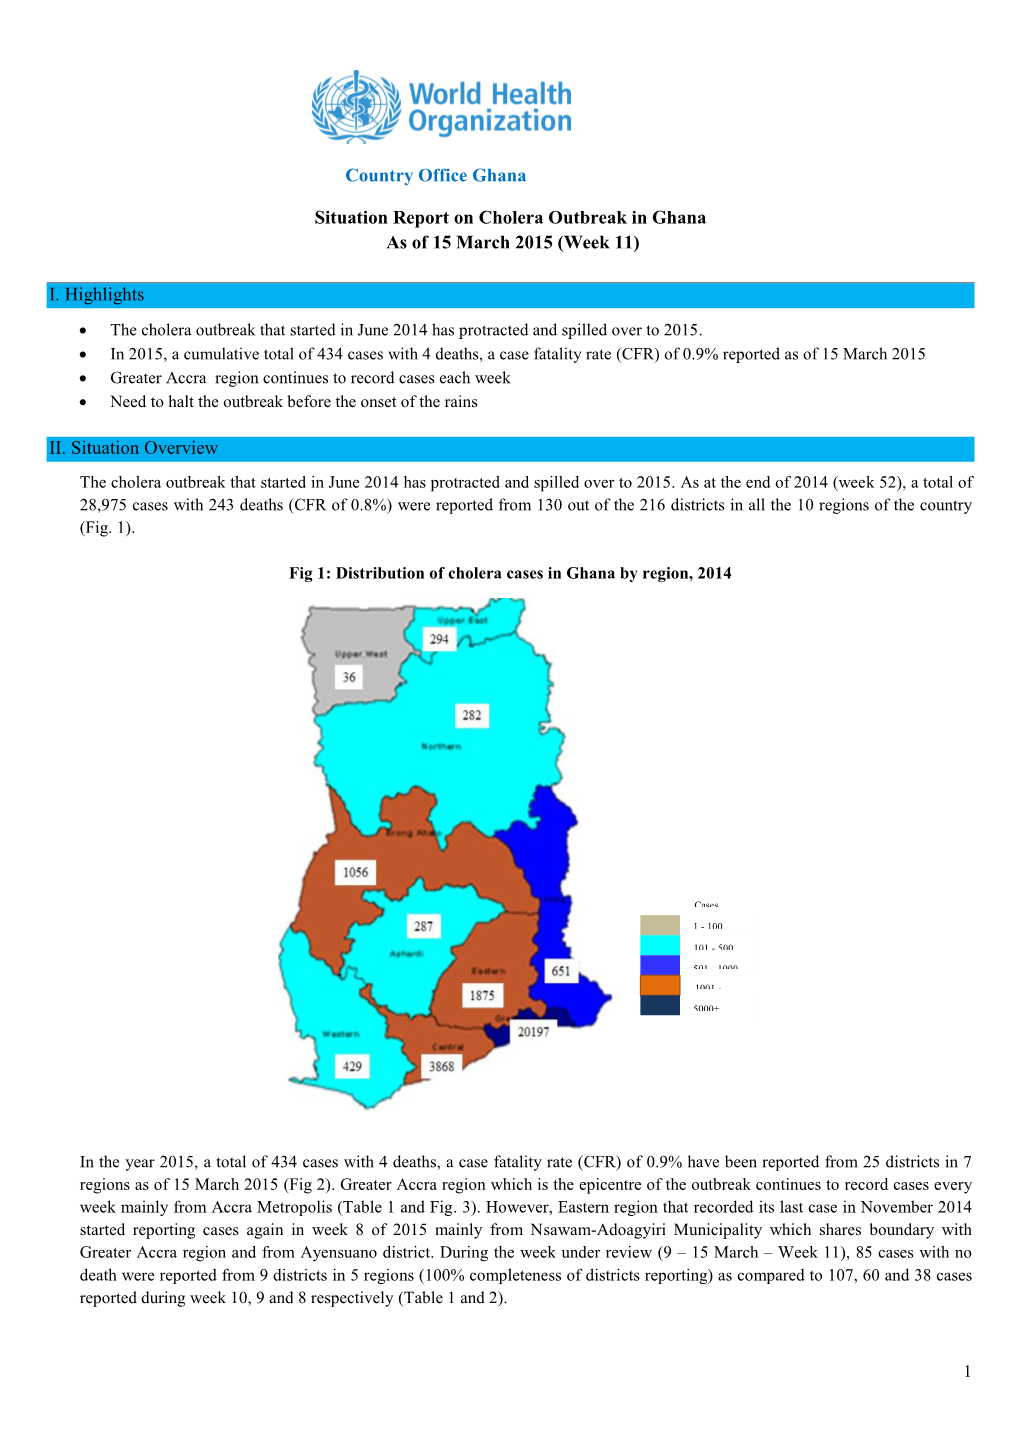 Country Office Ghana Situation Report on Cholera Outbreak